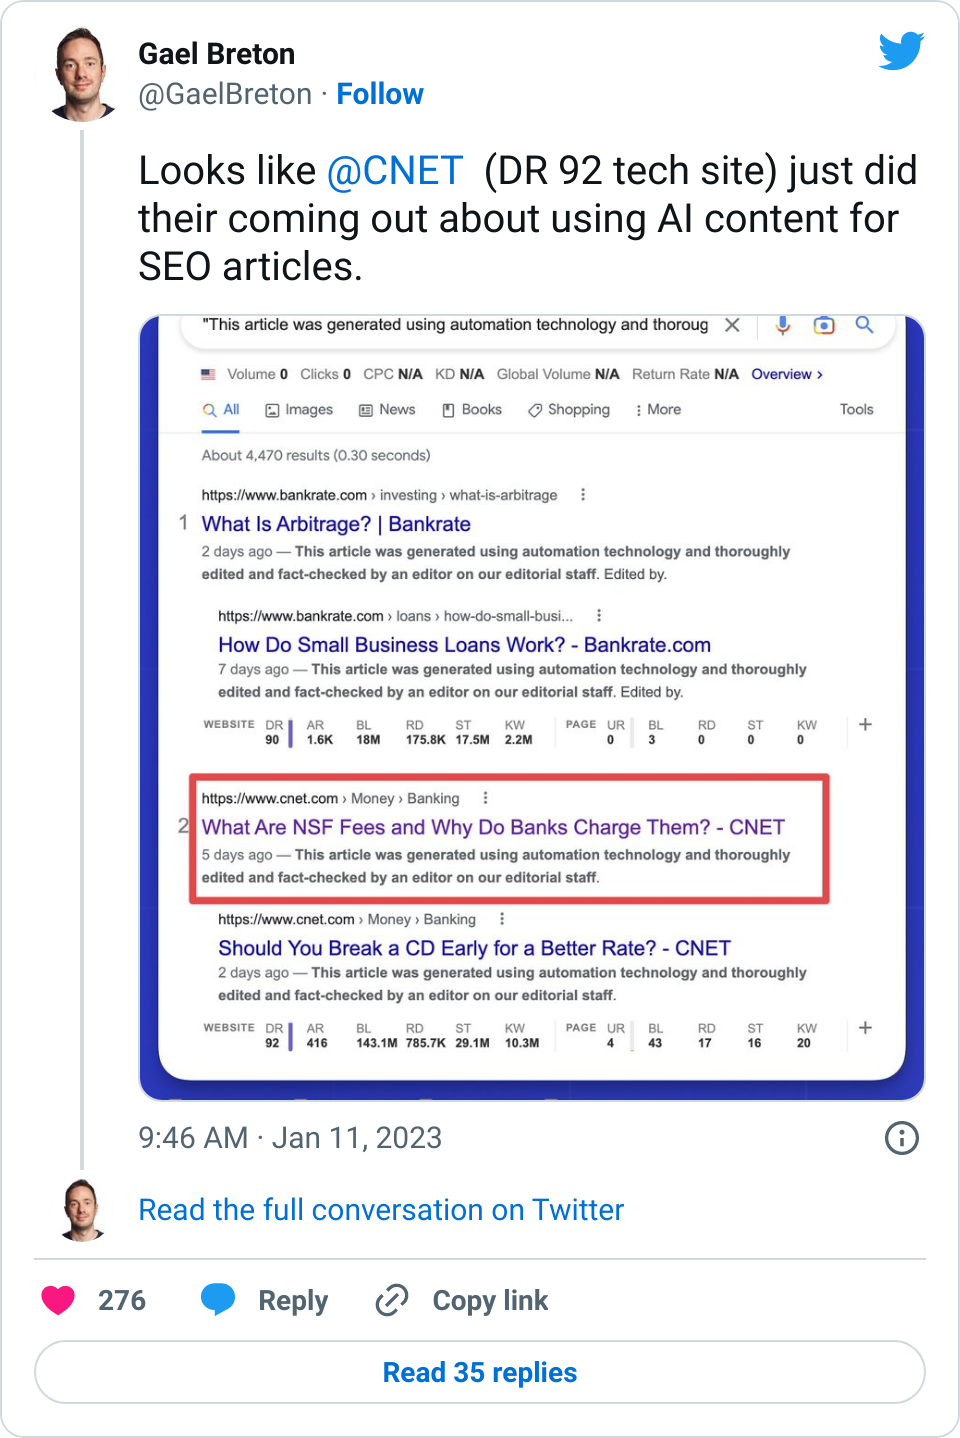 Text of tweet from @GaelBreton: Looks like @CNET (DR 92 tech site) just did their coming out about using AI content for SEO articles. It includes a screenshot of a Google search results page for “This article was generated using automation technology and thoroughly edited and fact-checked by an editor on our editorial staff.”